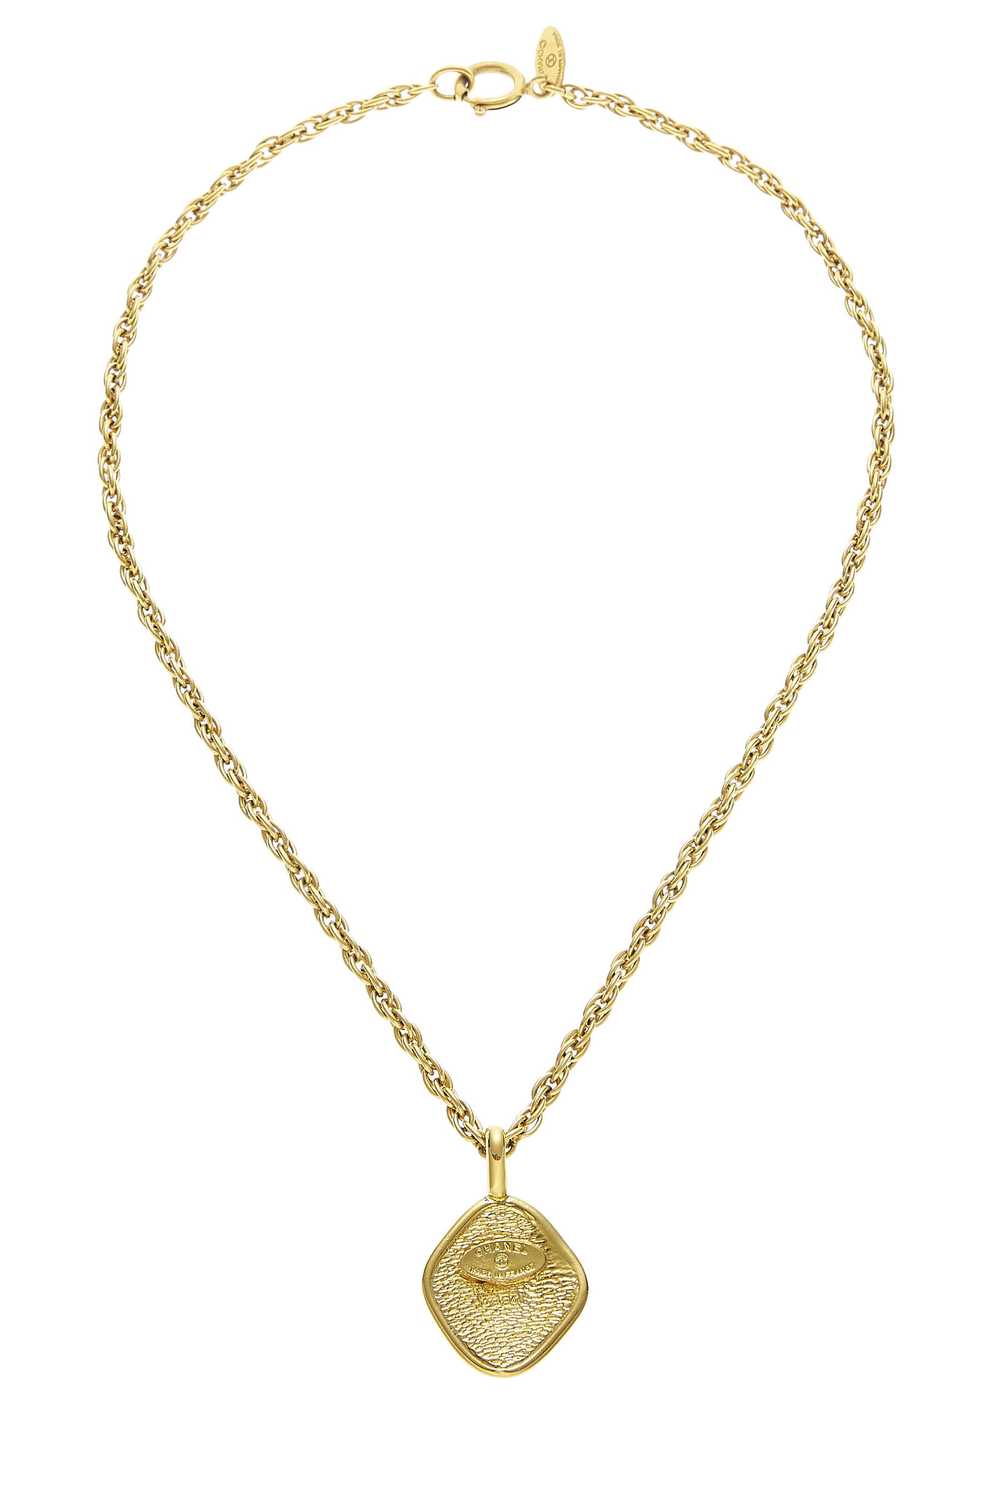 Gold Rue Cambon Charm Necklace - image 2